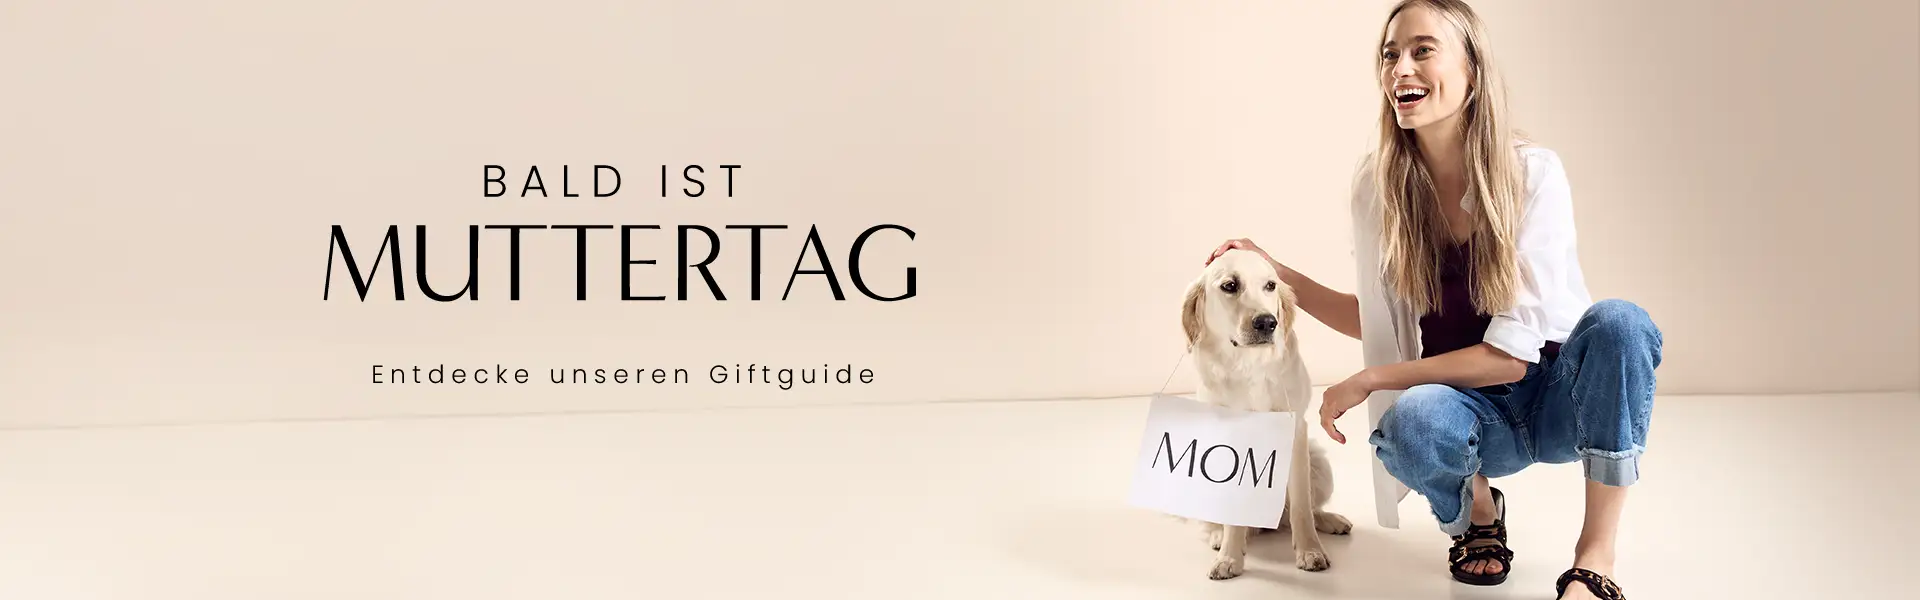 Muttertag: Giftguide